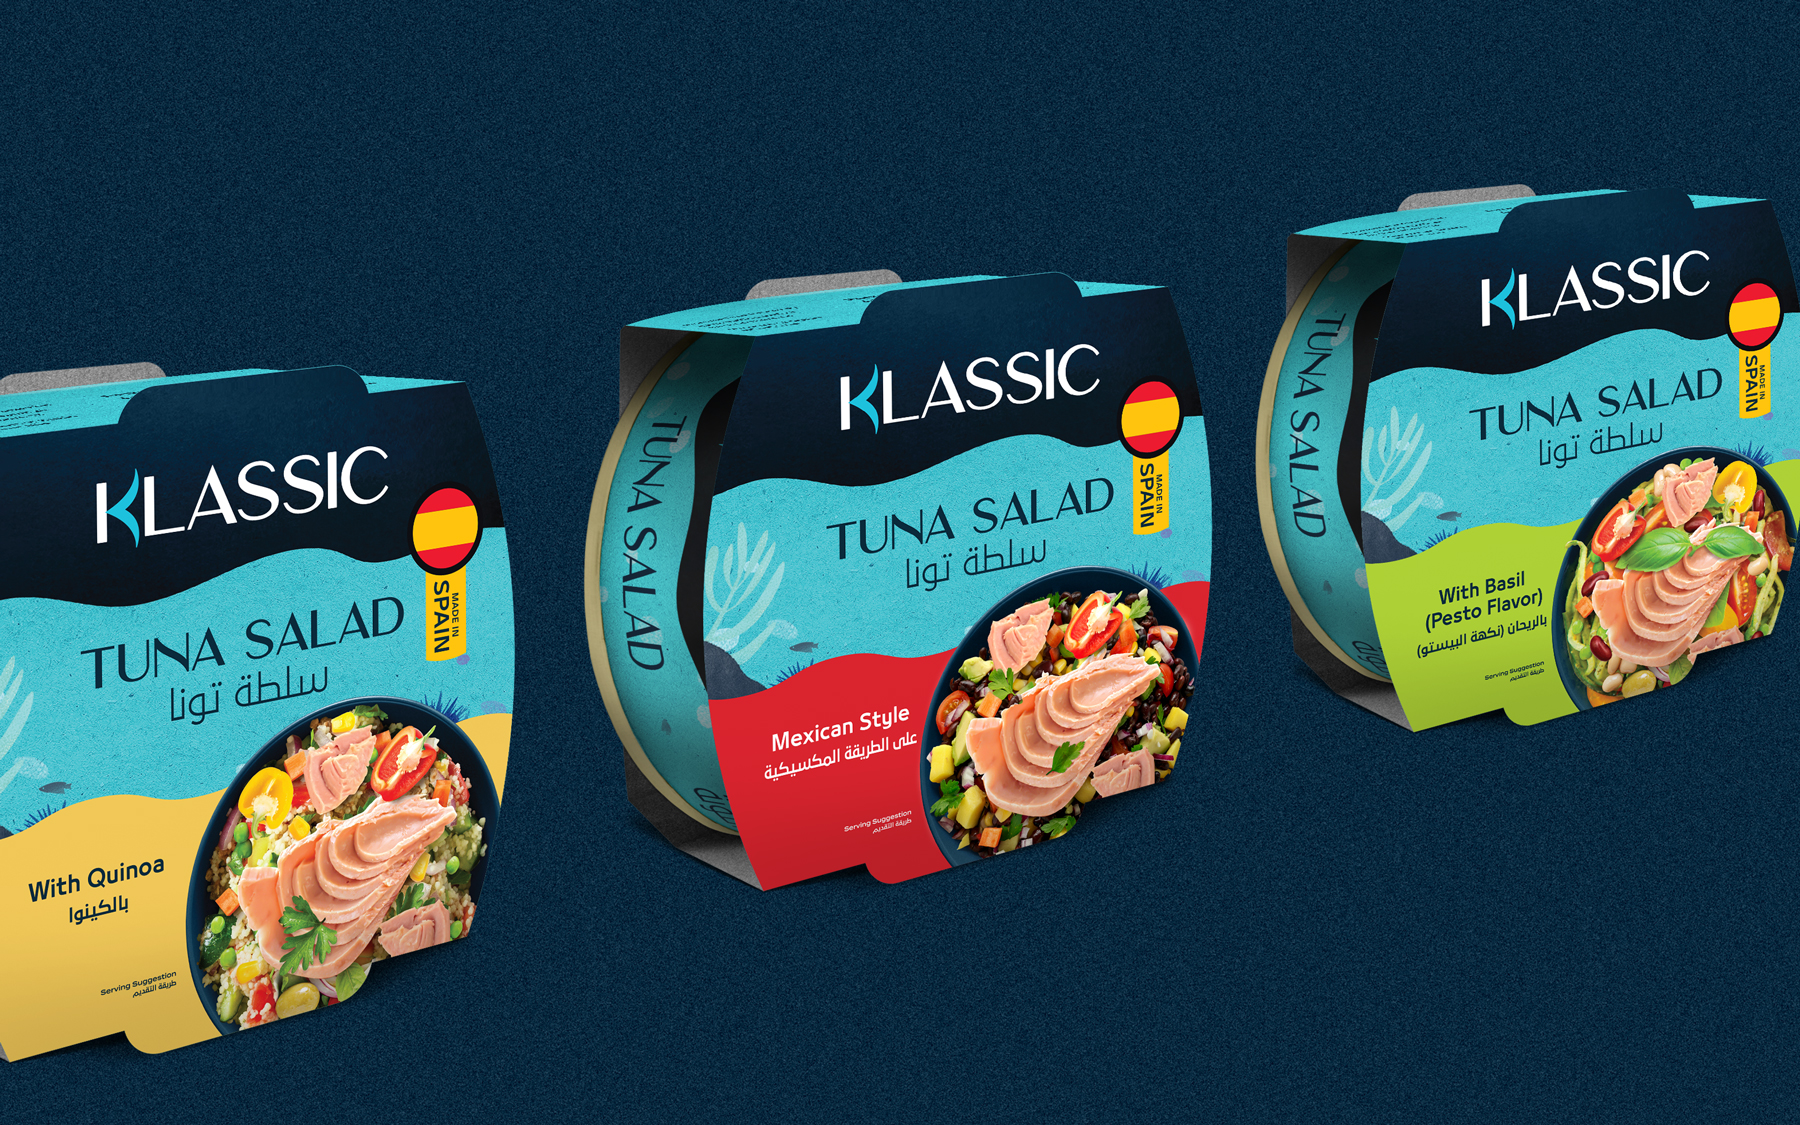 Adaptation of packaging designs with sophistication, setting a new benchmark of elegance.